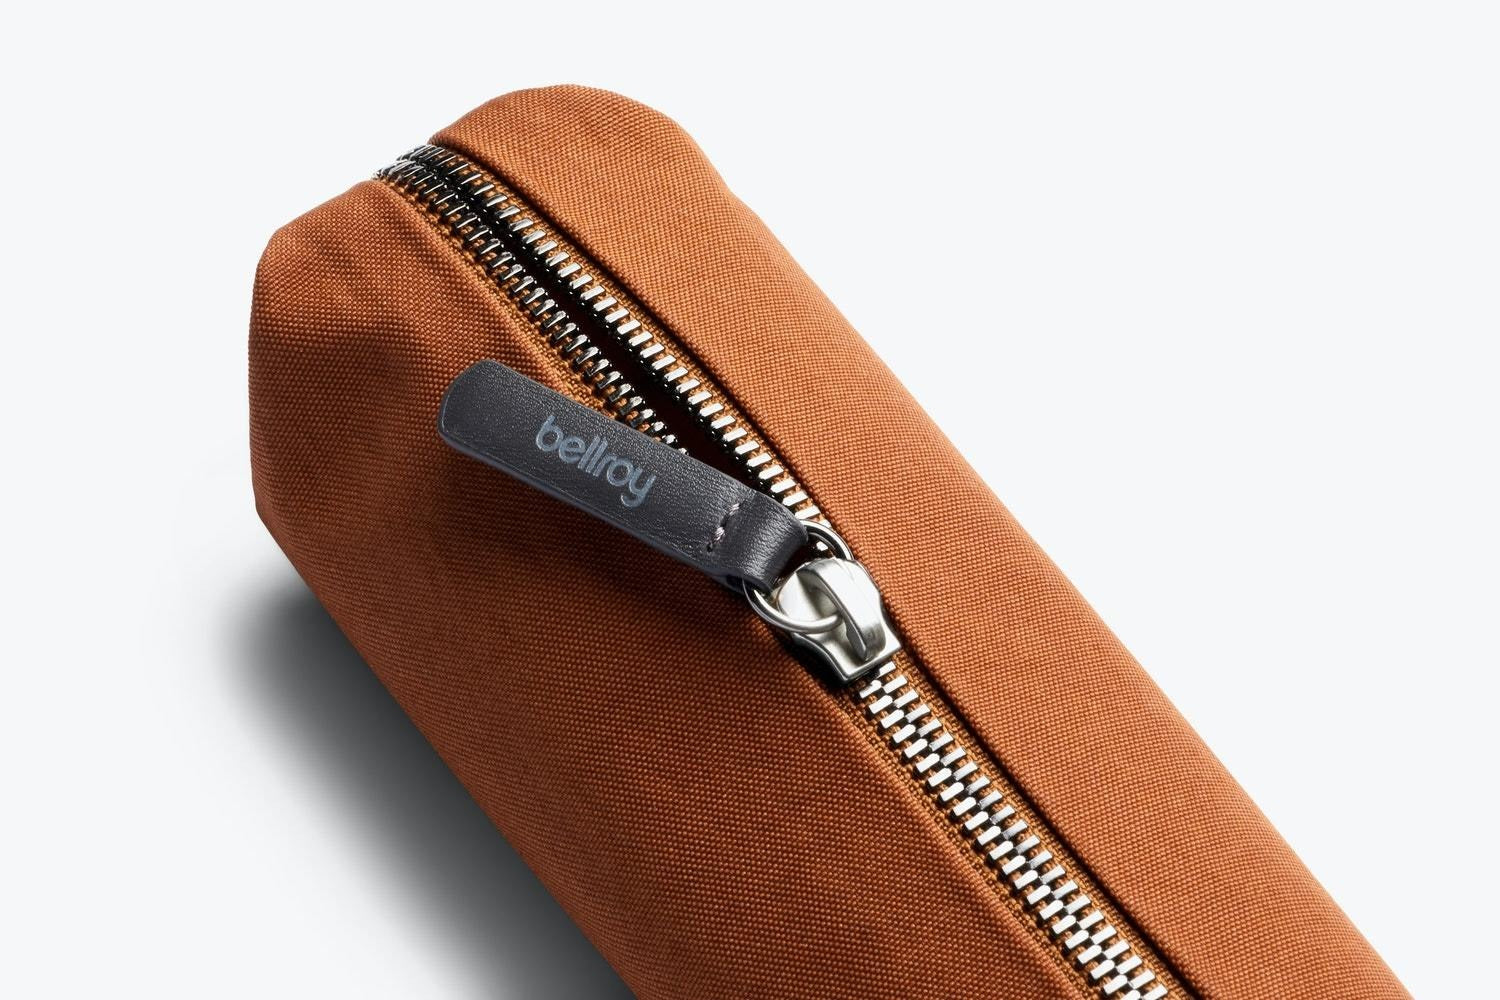 Bellroy Pencil Case - Storming Gravity